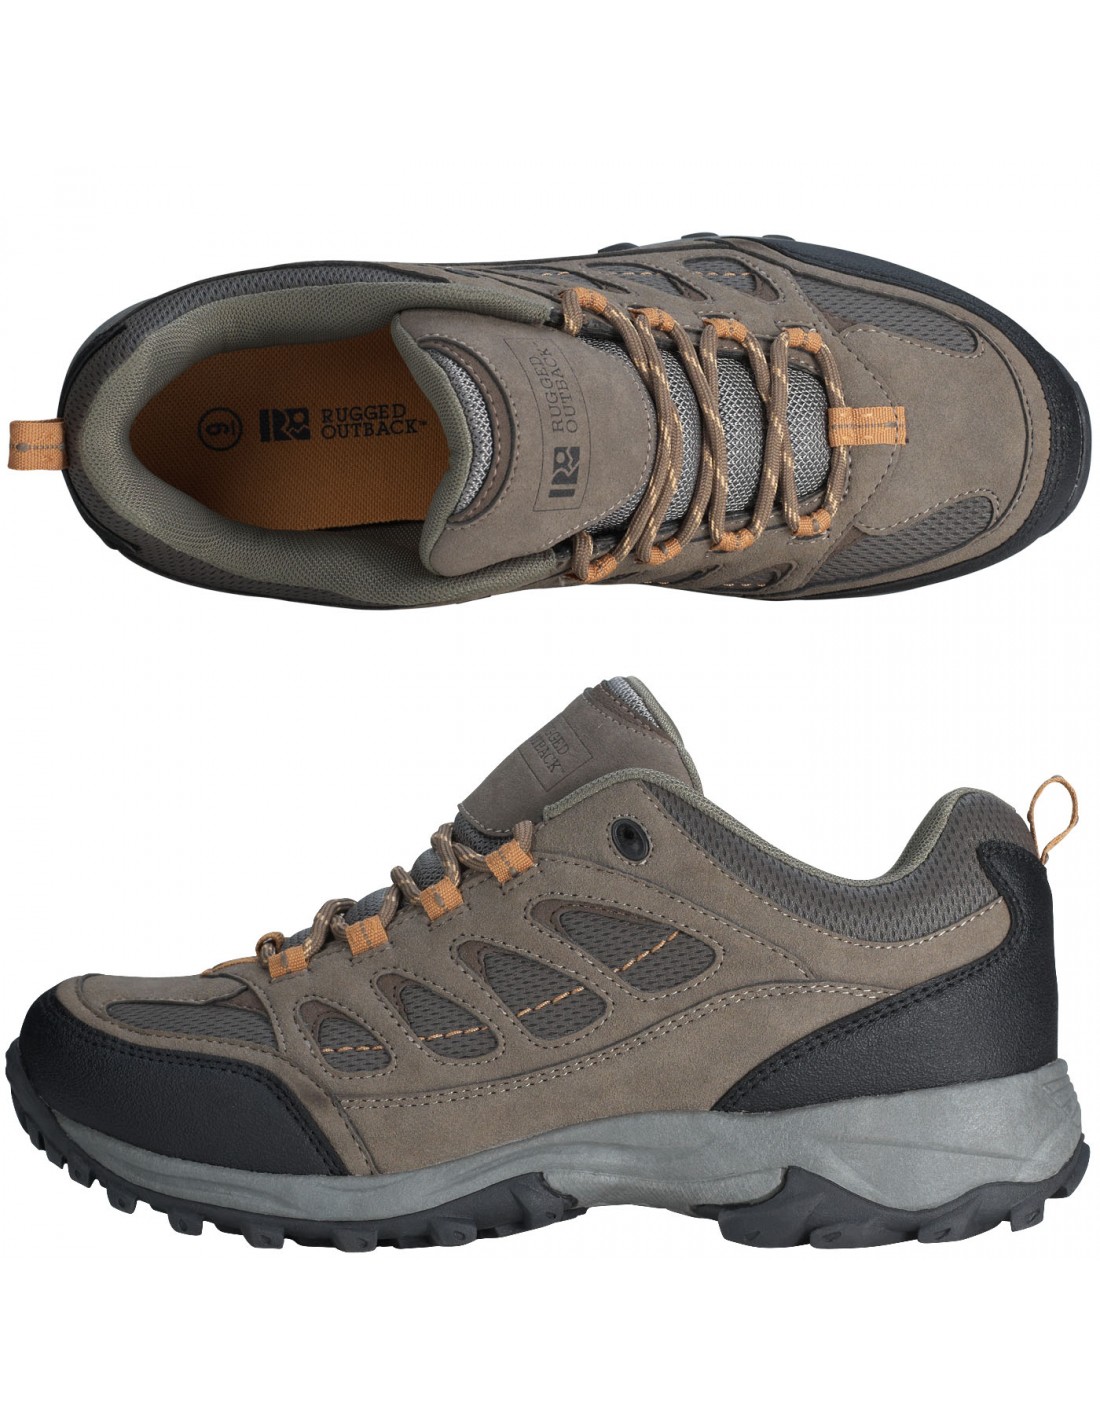 Buy > rugged outback boots > in stock